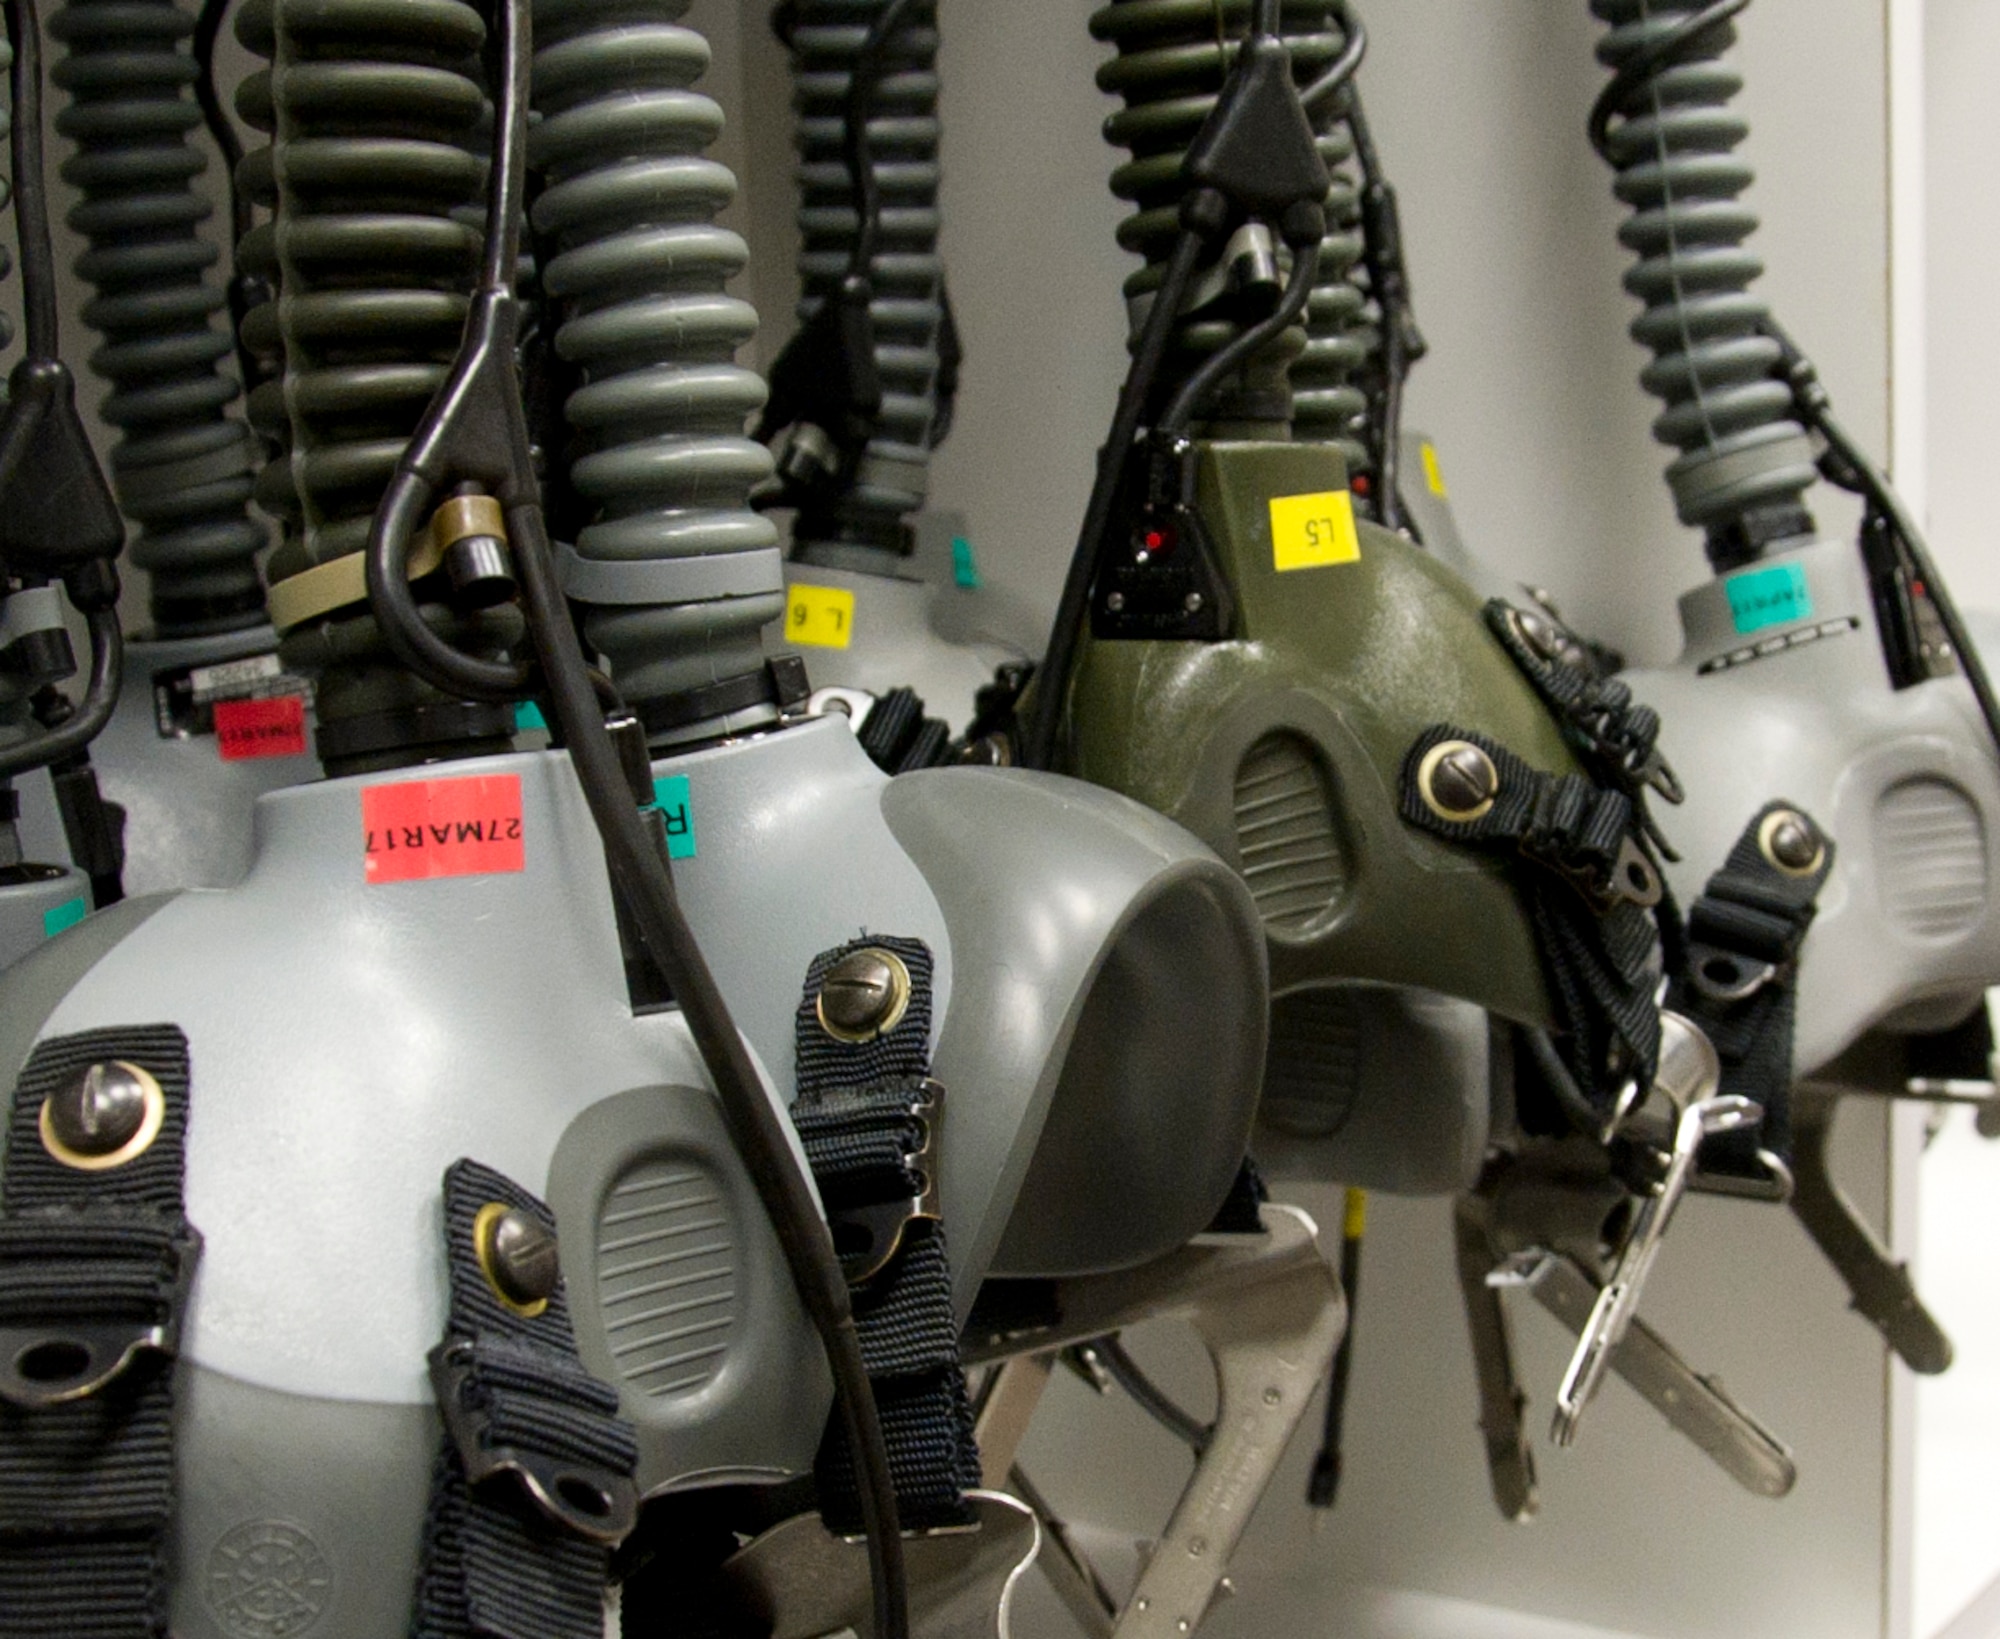 Oxygen Mask Breathing Units-5/P are stored on hooks when not being used by students undergoing altitude training at the 779th Aerospace Medical Squadron chamber facility at Joint Base Andrews, Md. Students are typically military or civilian personnel who perform their jobs in flying aircraft, like pilots, flight engineers, boom operators, load masters, flight attendants and aerial photographers. (U.S. Air Force photo by Staff Sgt. Joe Yanik)